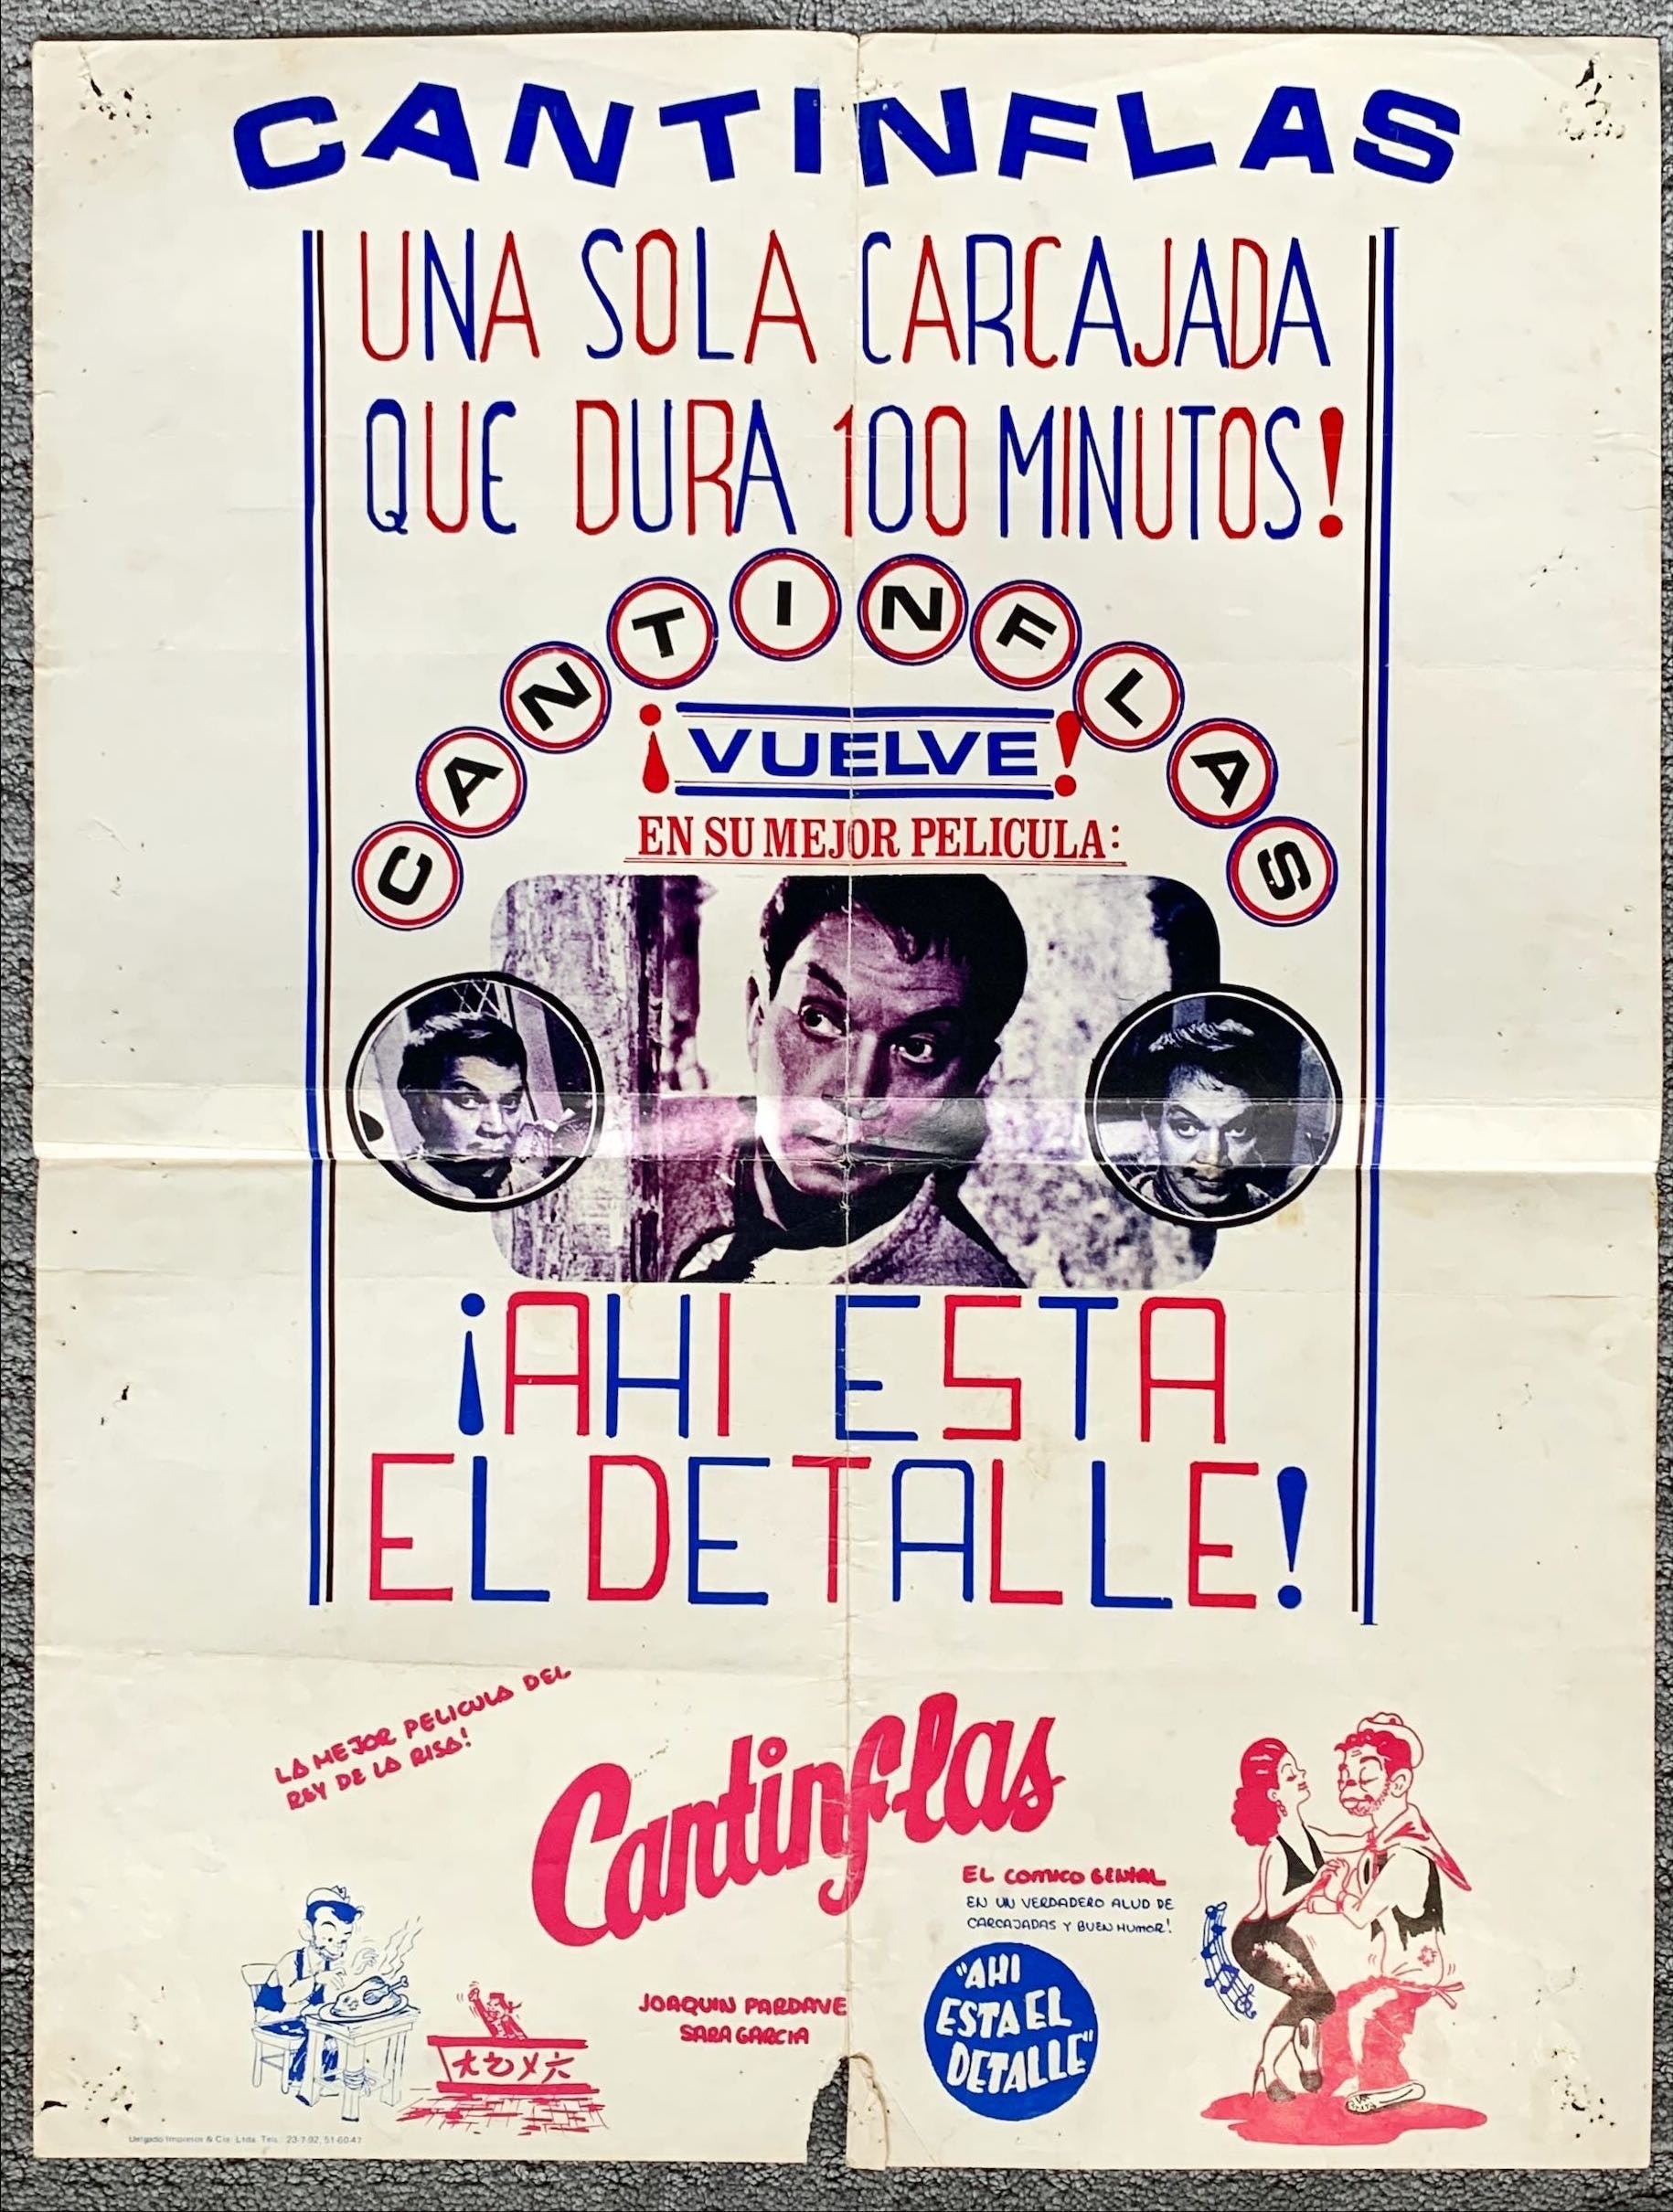 Cantinfla Poster pic